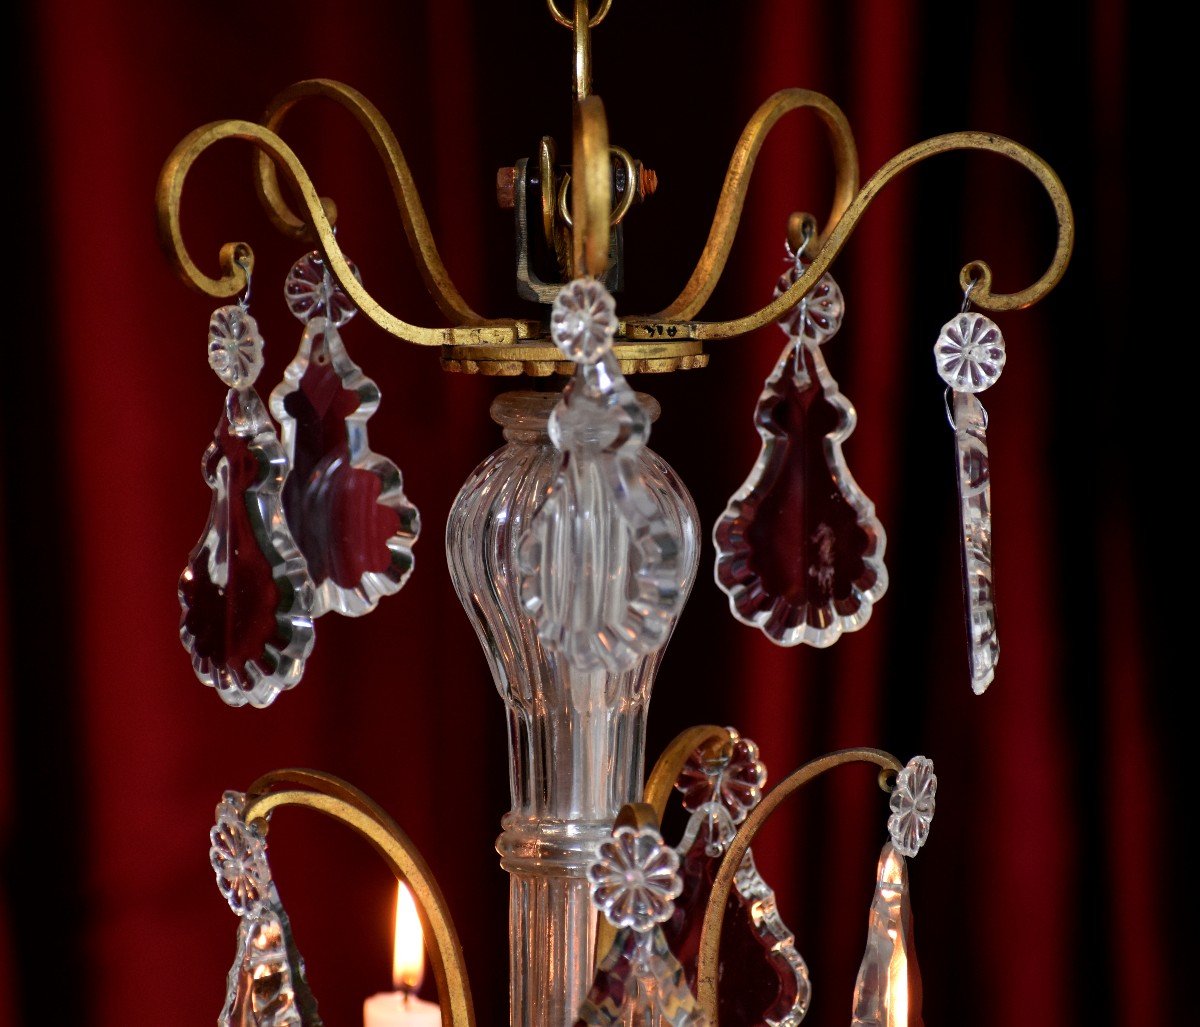 Bronze Chandelier With Pendants, Pendants And Dagger Plates, Candle Lighting, Five Arms-photo-1